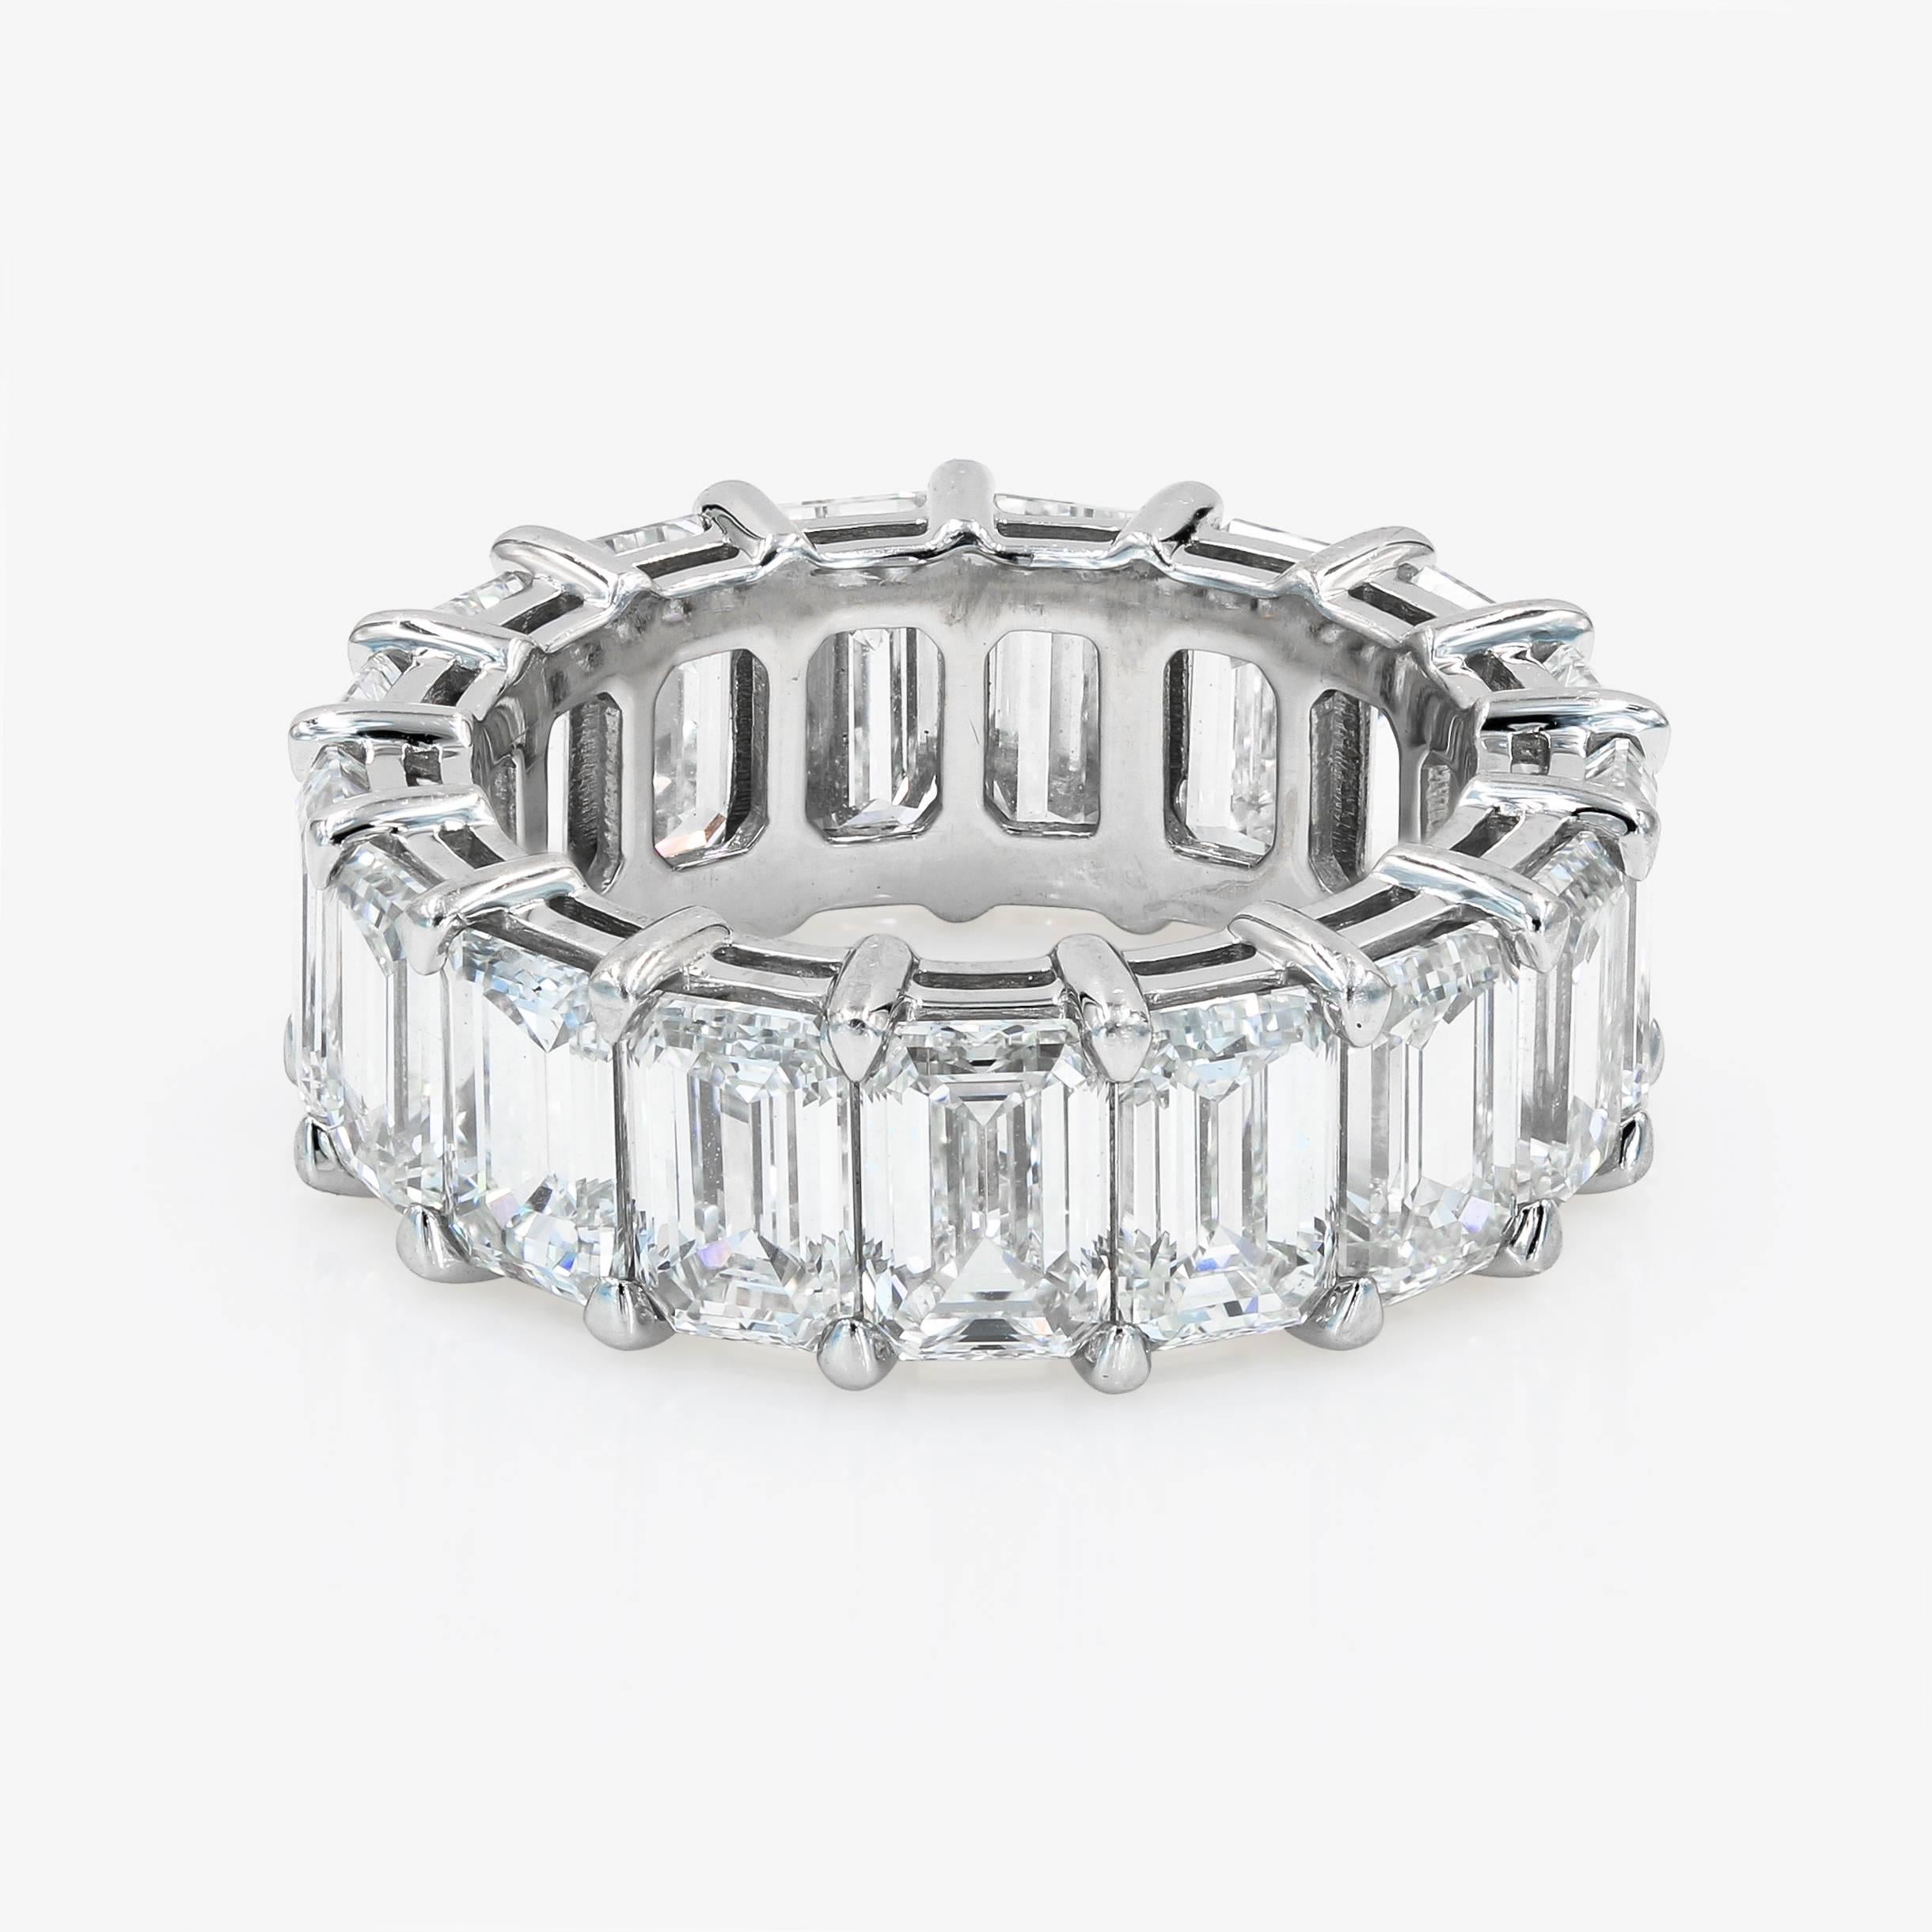 This exquisite eternity band is set in platinum with 17 GIA Certified Emerald cut Diamonds = 11.90cts. tw. They average .70ct. each stone.

The pieces comes with GIA Diamond Grading Reports on all stones. They range from D-G color and VS1-SI